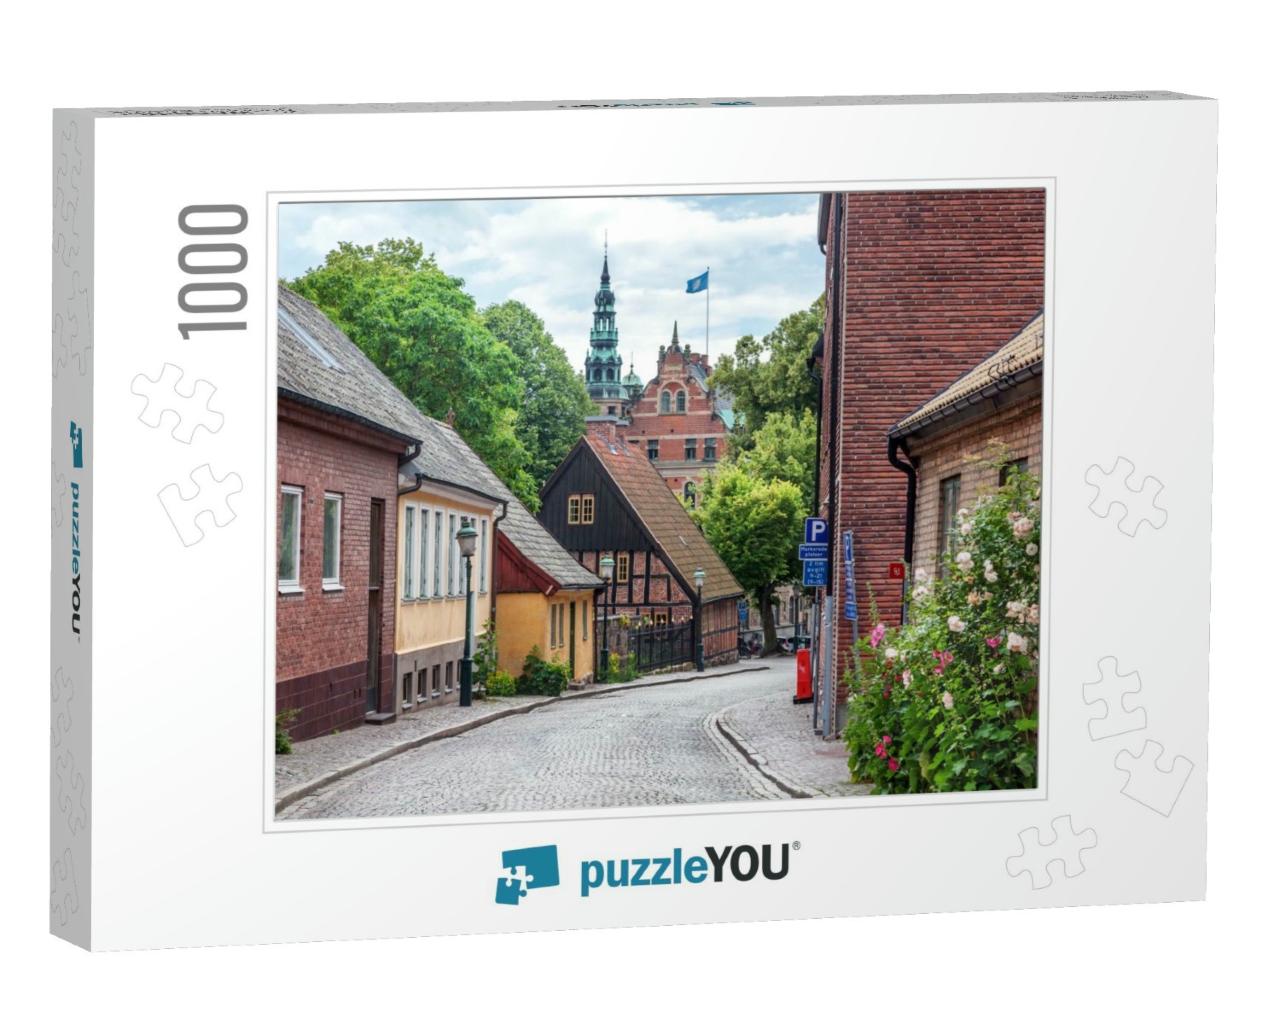 Lund, a Small Old Town in Sweden, Scandinavian Architectu... Jigsaw Puzzle with 1000 pieces